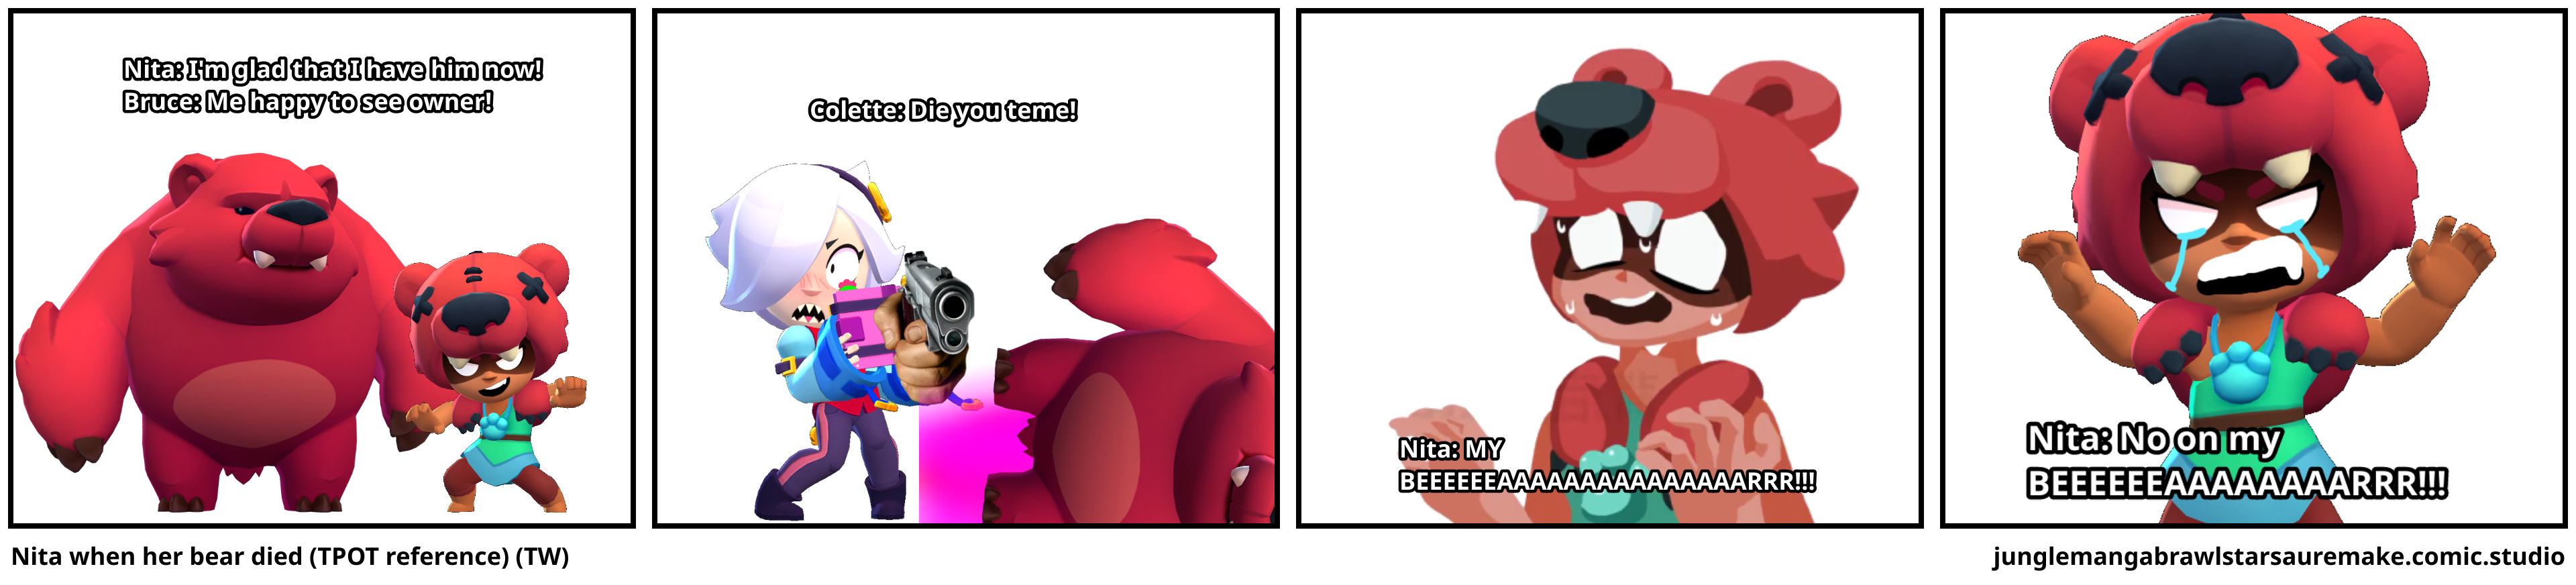 Nita when her bear died (TPOT reference) (TW)